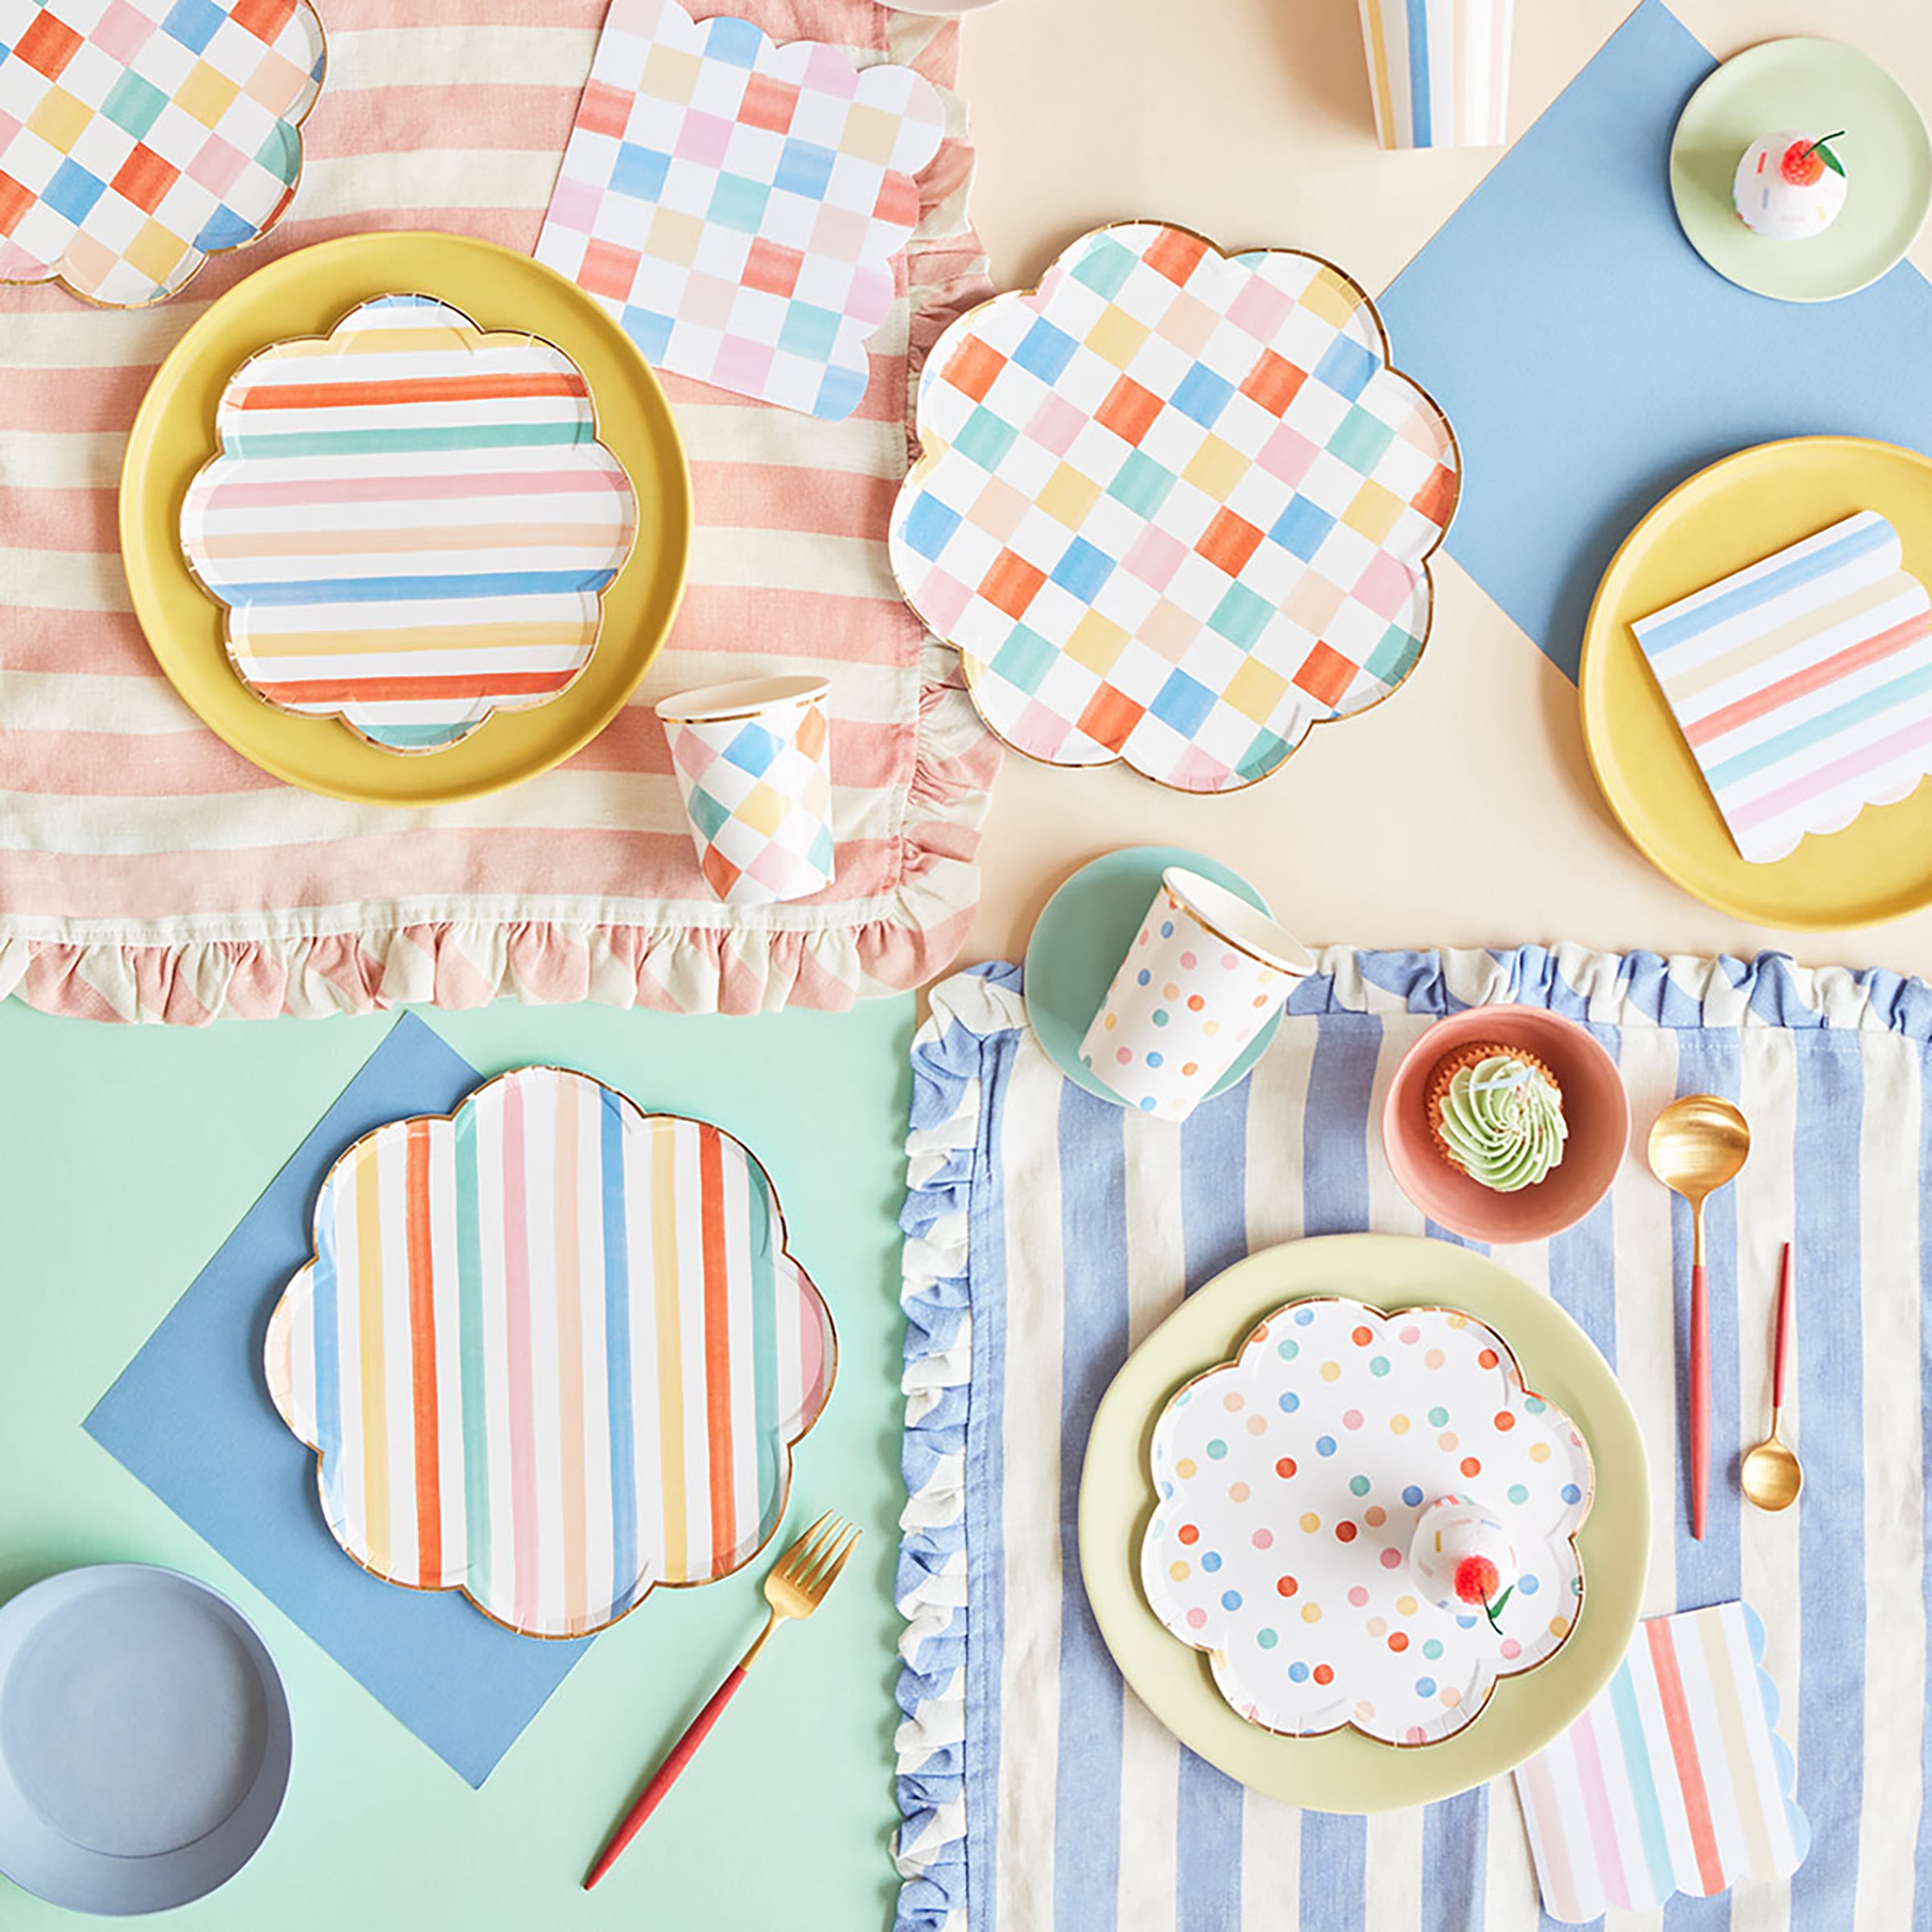 Our decorative plates include spotty plates, checked plates and striped plates in bright colours.